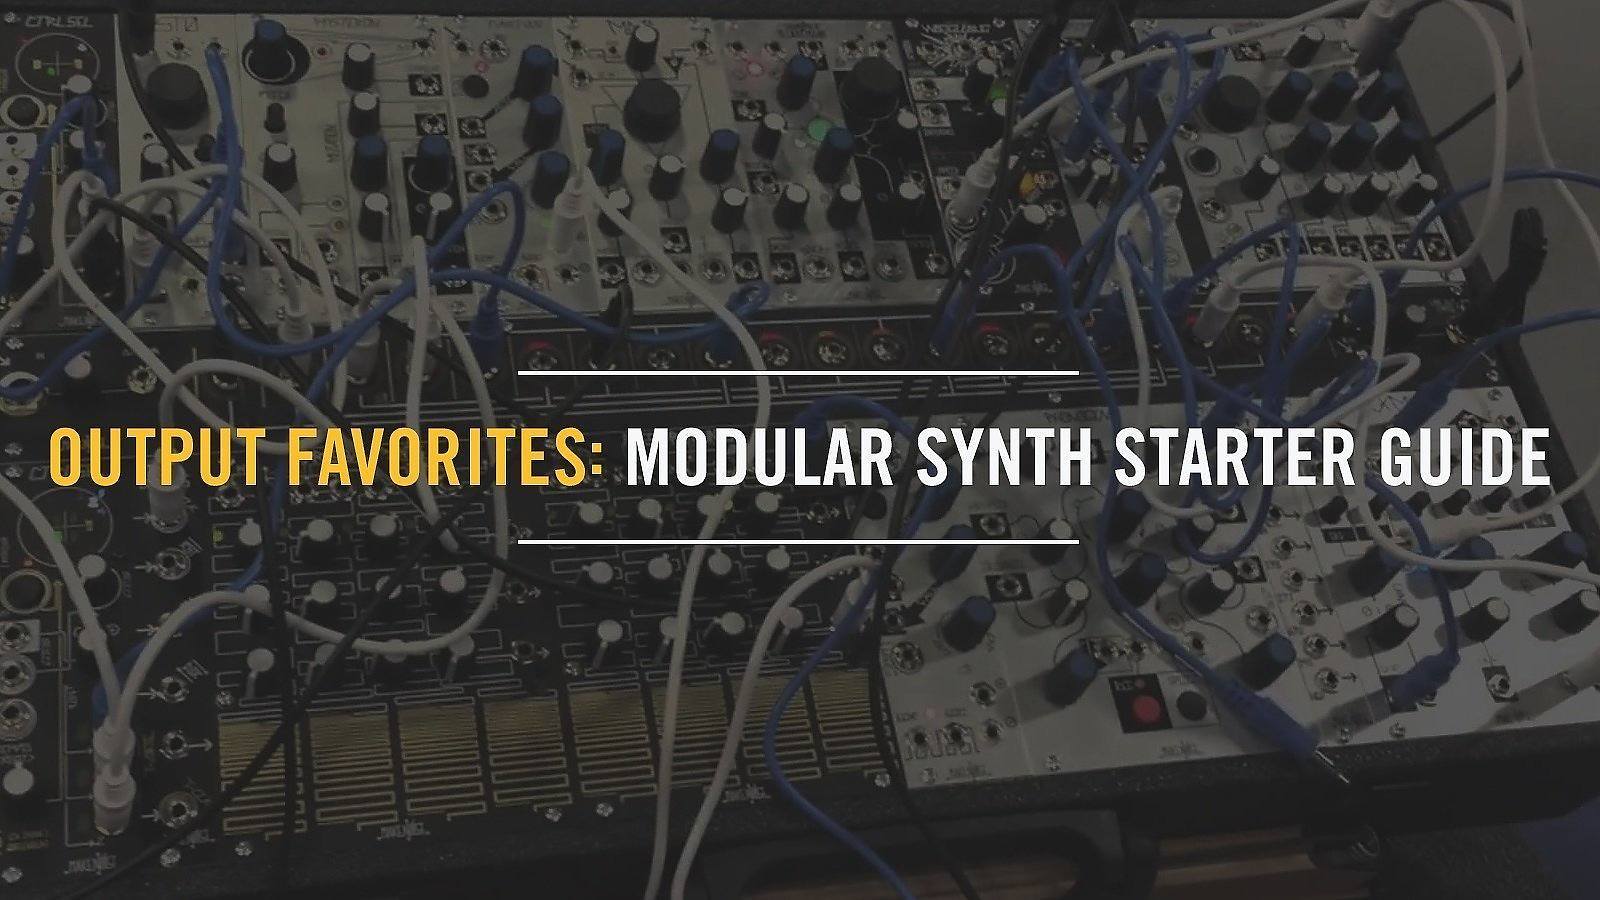 Output Favorites: Modular Synth Starter Guide